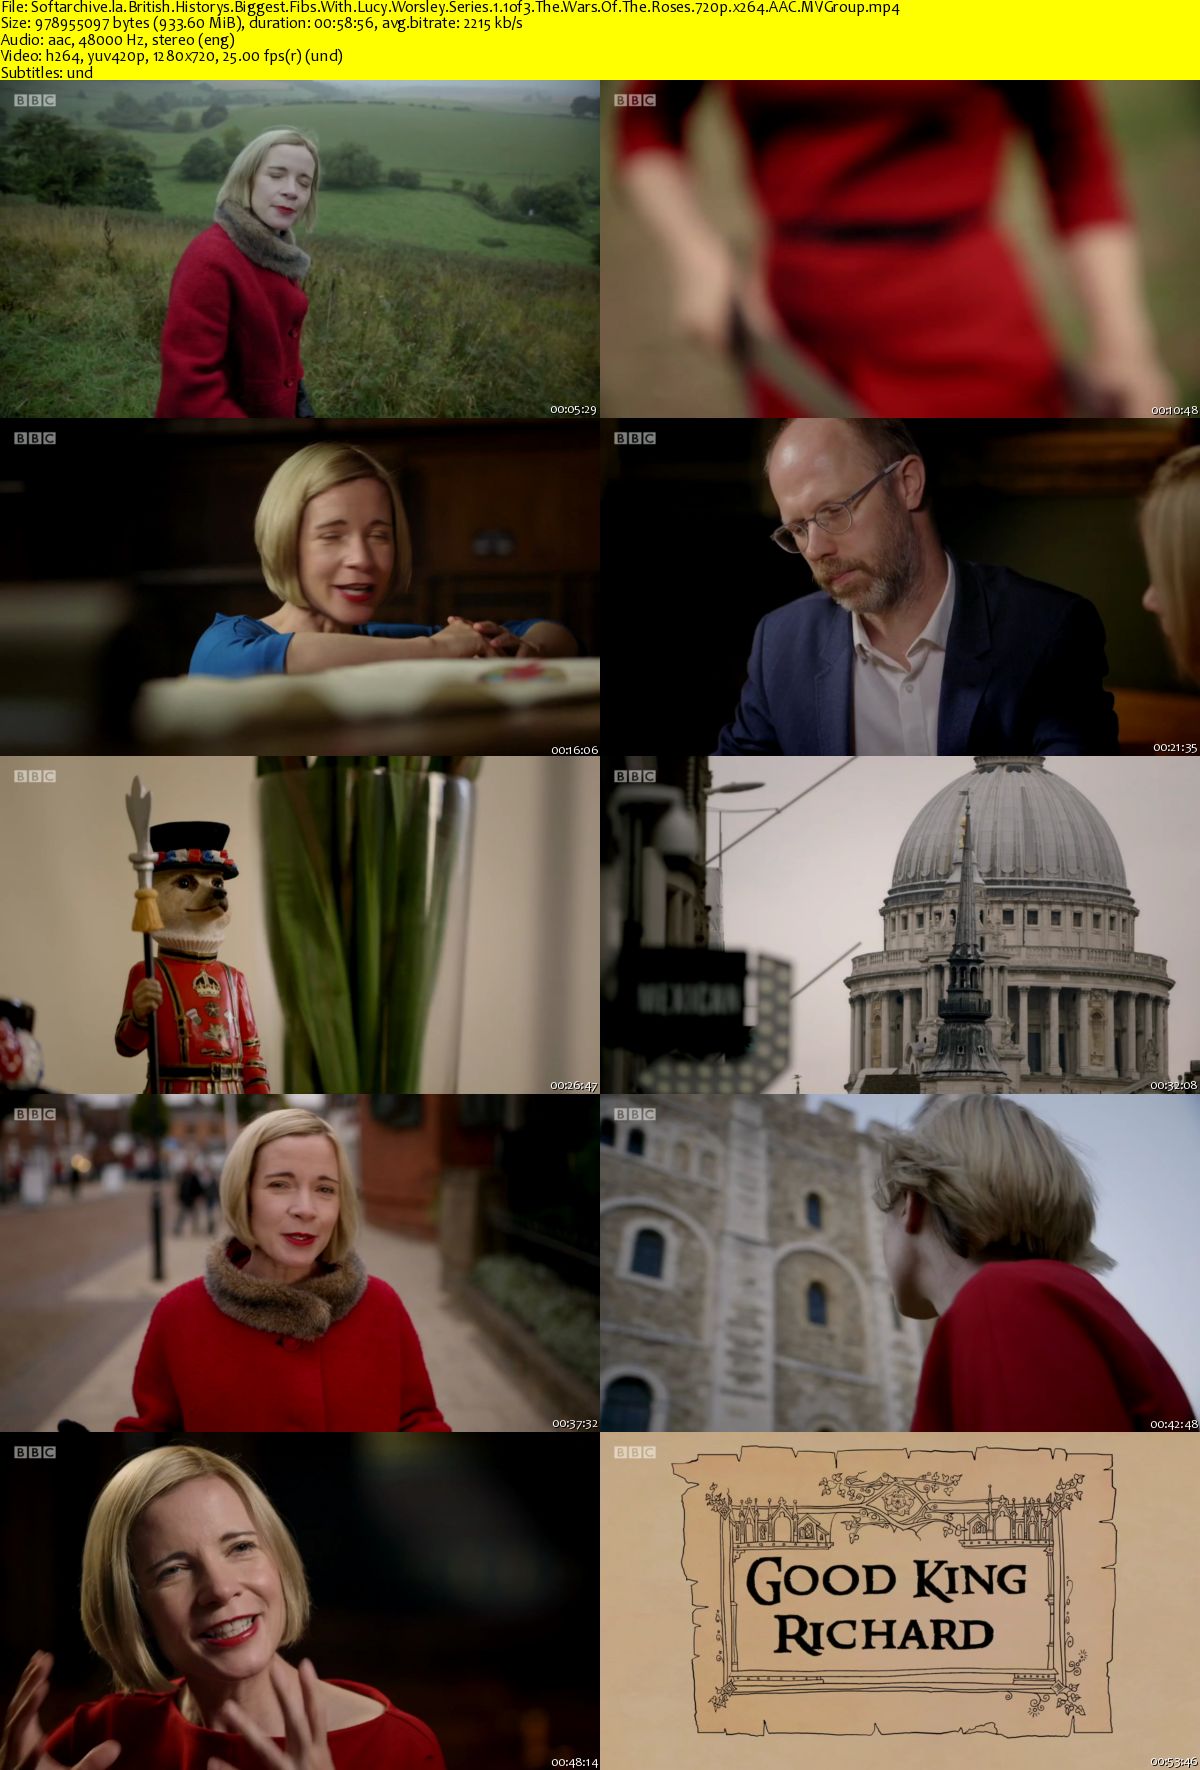 British Historys Biggest Fibs With Lucy Worsley 2017 Series 1.1of3 The ...